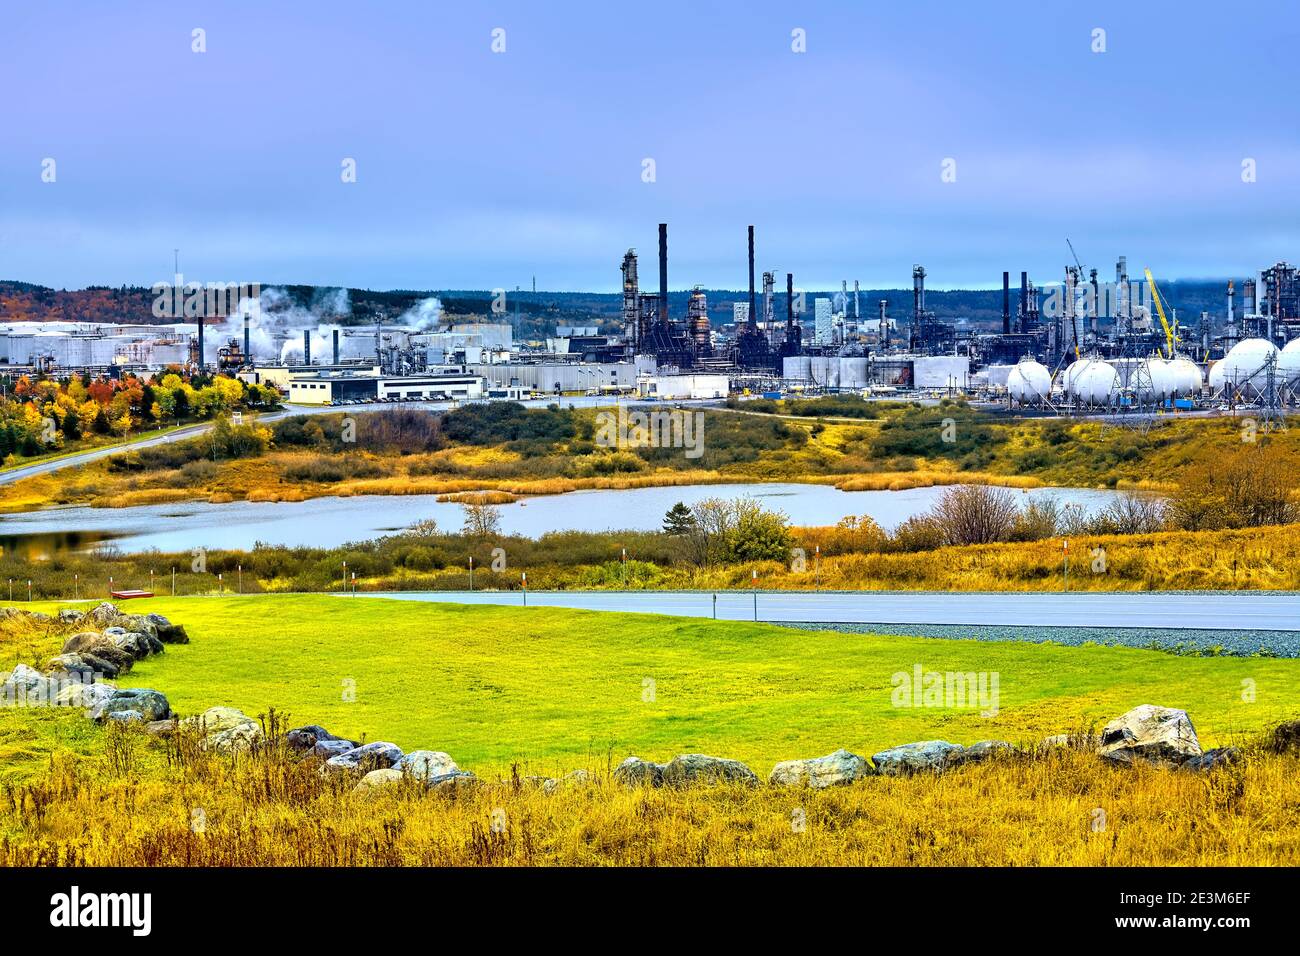 An autumn image of the large Irving Oil Refinery in rural Saint John New Brunswick Canada with the local foliage turning the bright colors of autumn. Stock Photo